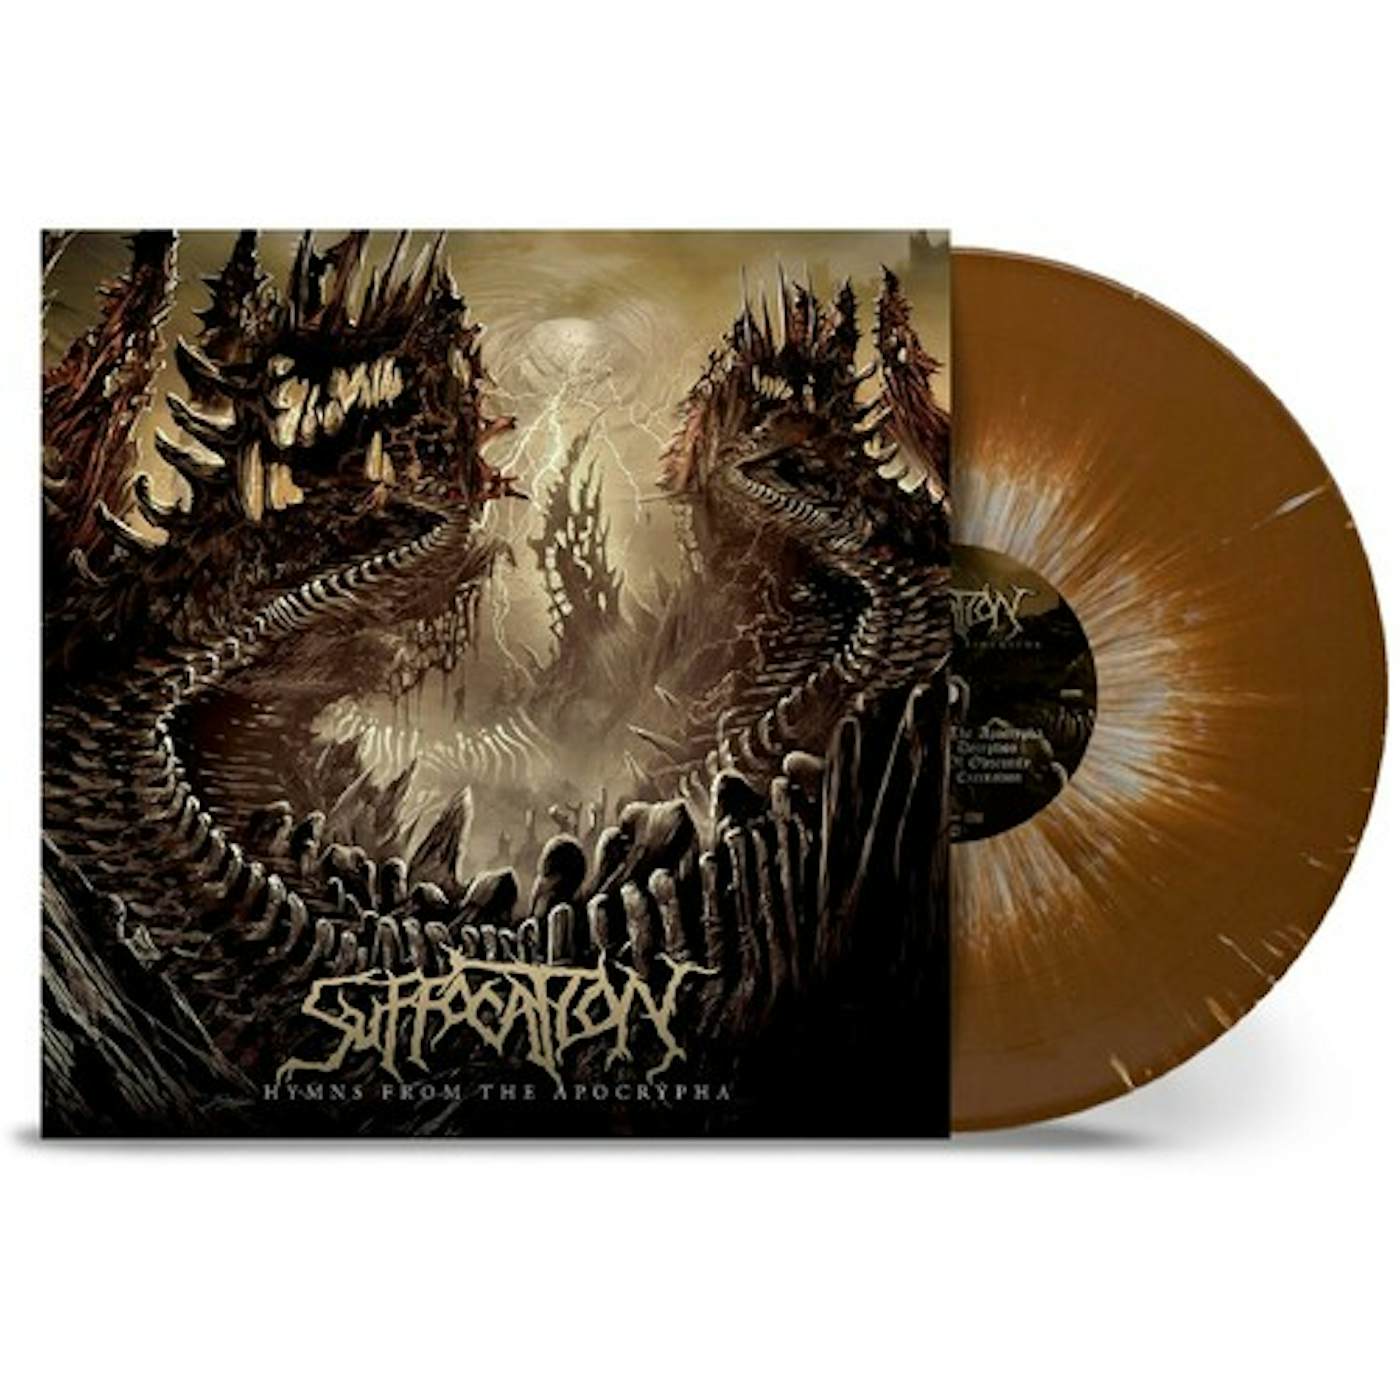 Suffocation HYMNS FROM THE APOCRYPHA - BROWN & WHITE SPLATTER Vinyl Record